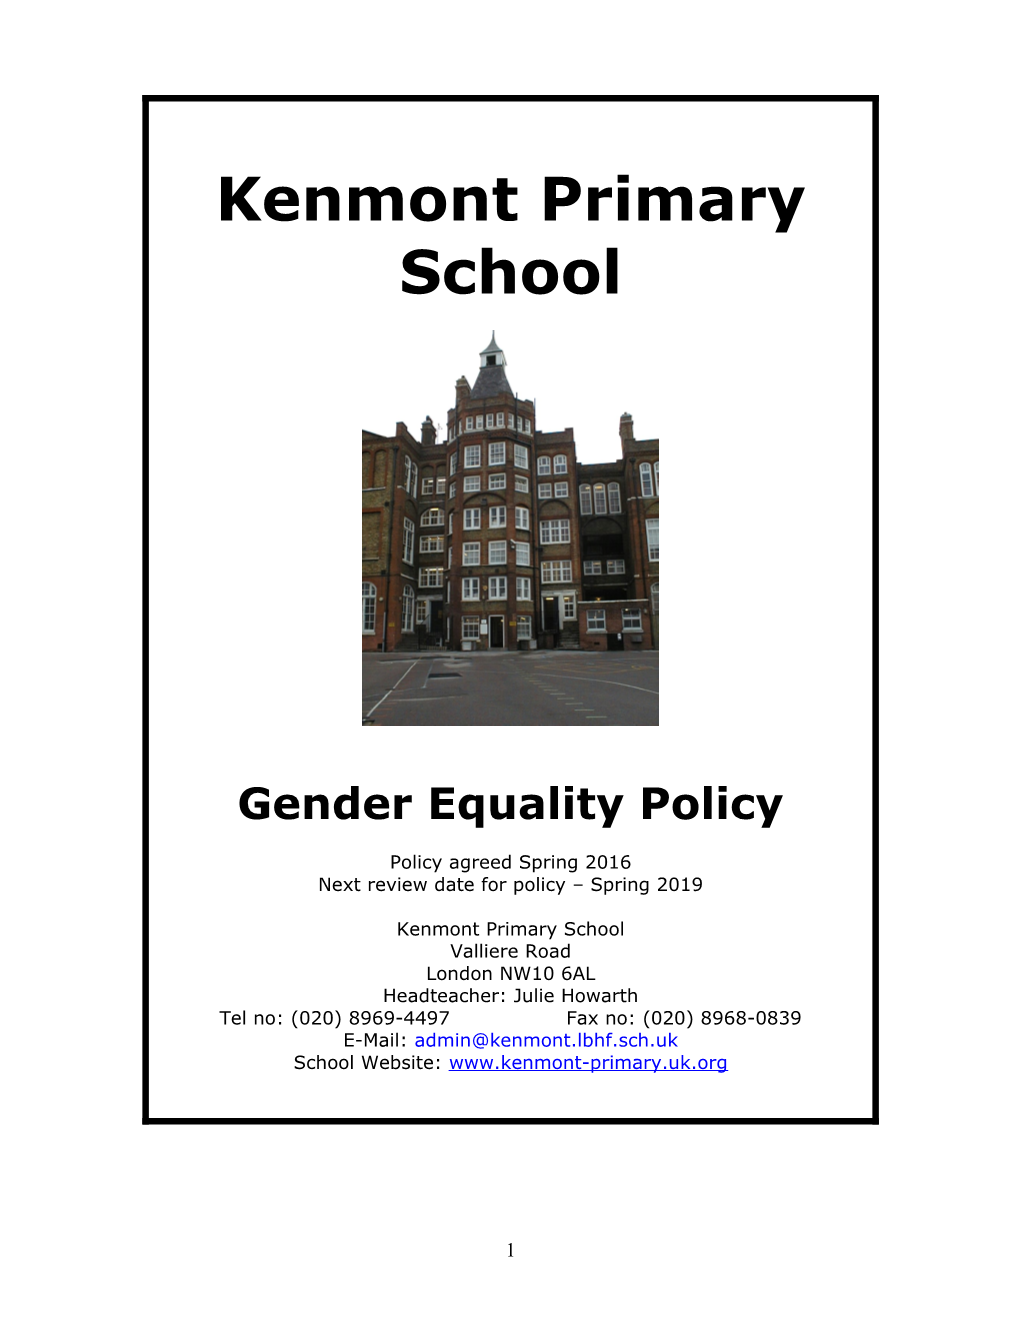 Kenmont School Gender Equality Policy